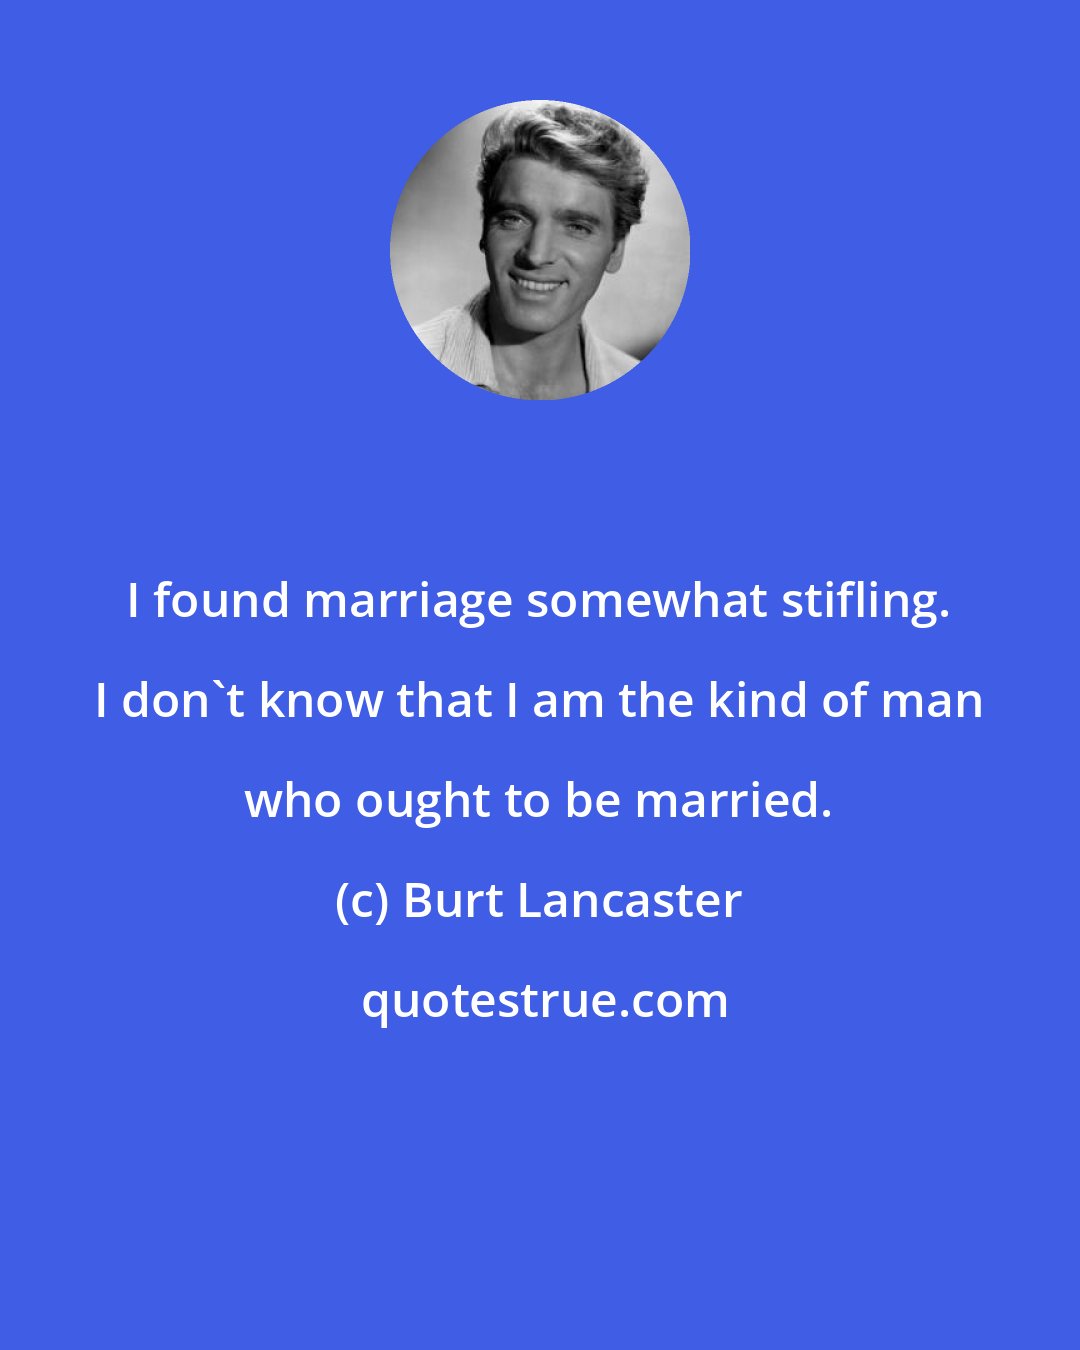 Burt Lancaster: I found marriage somewhat stifling. I don't know that I am the kind of man who ought to be married.